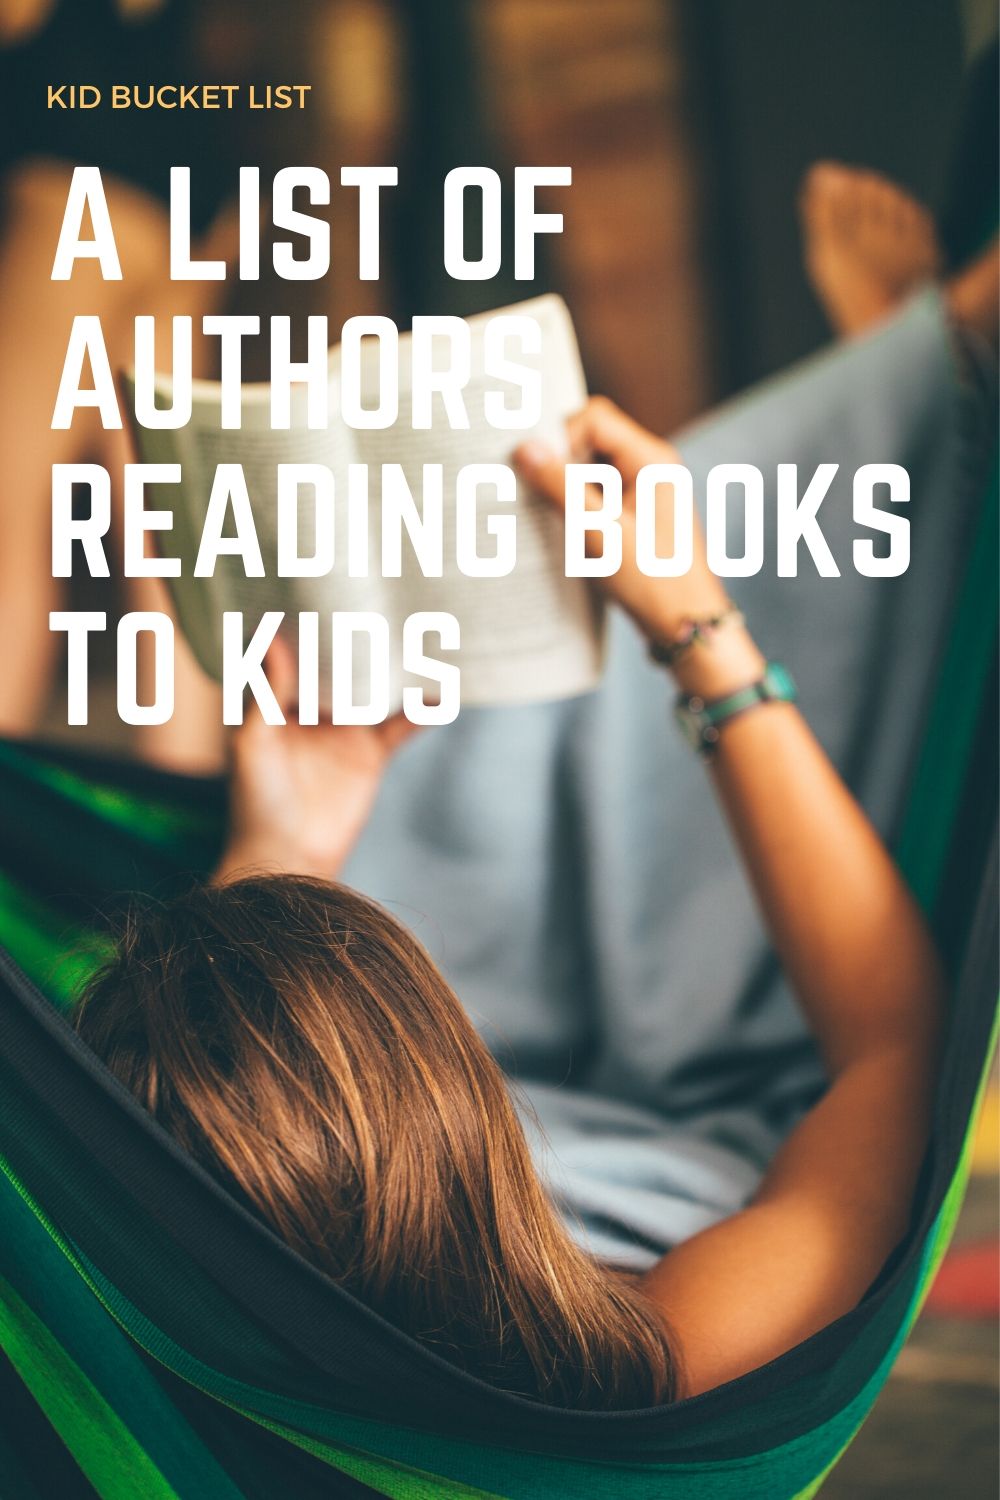 Authors Reading Books to Kids